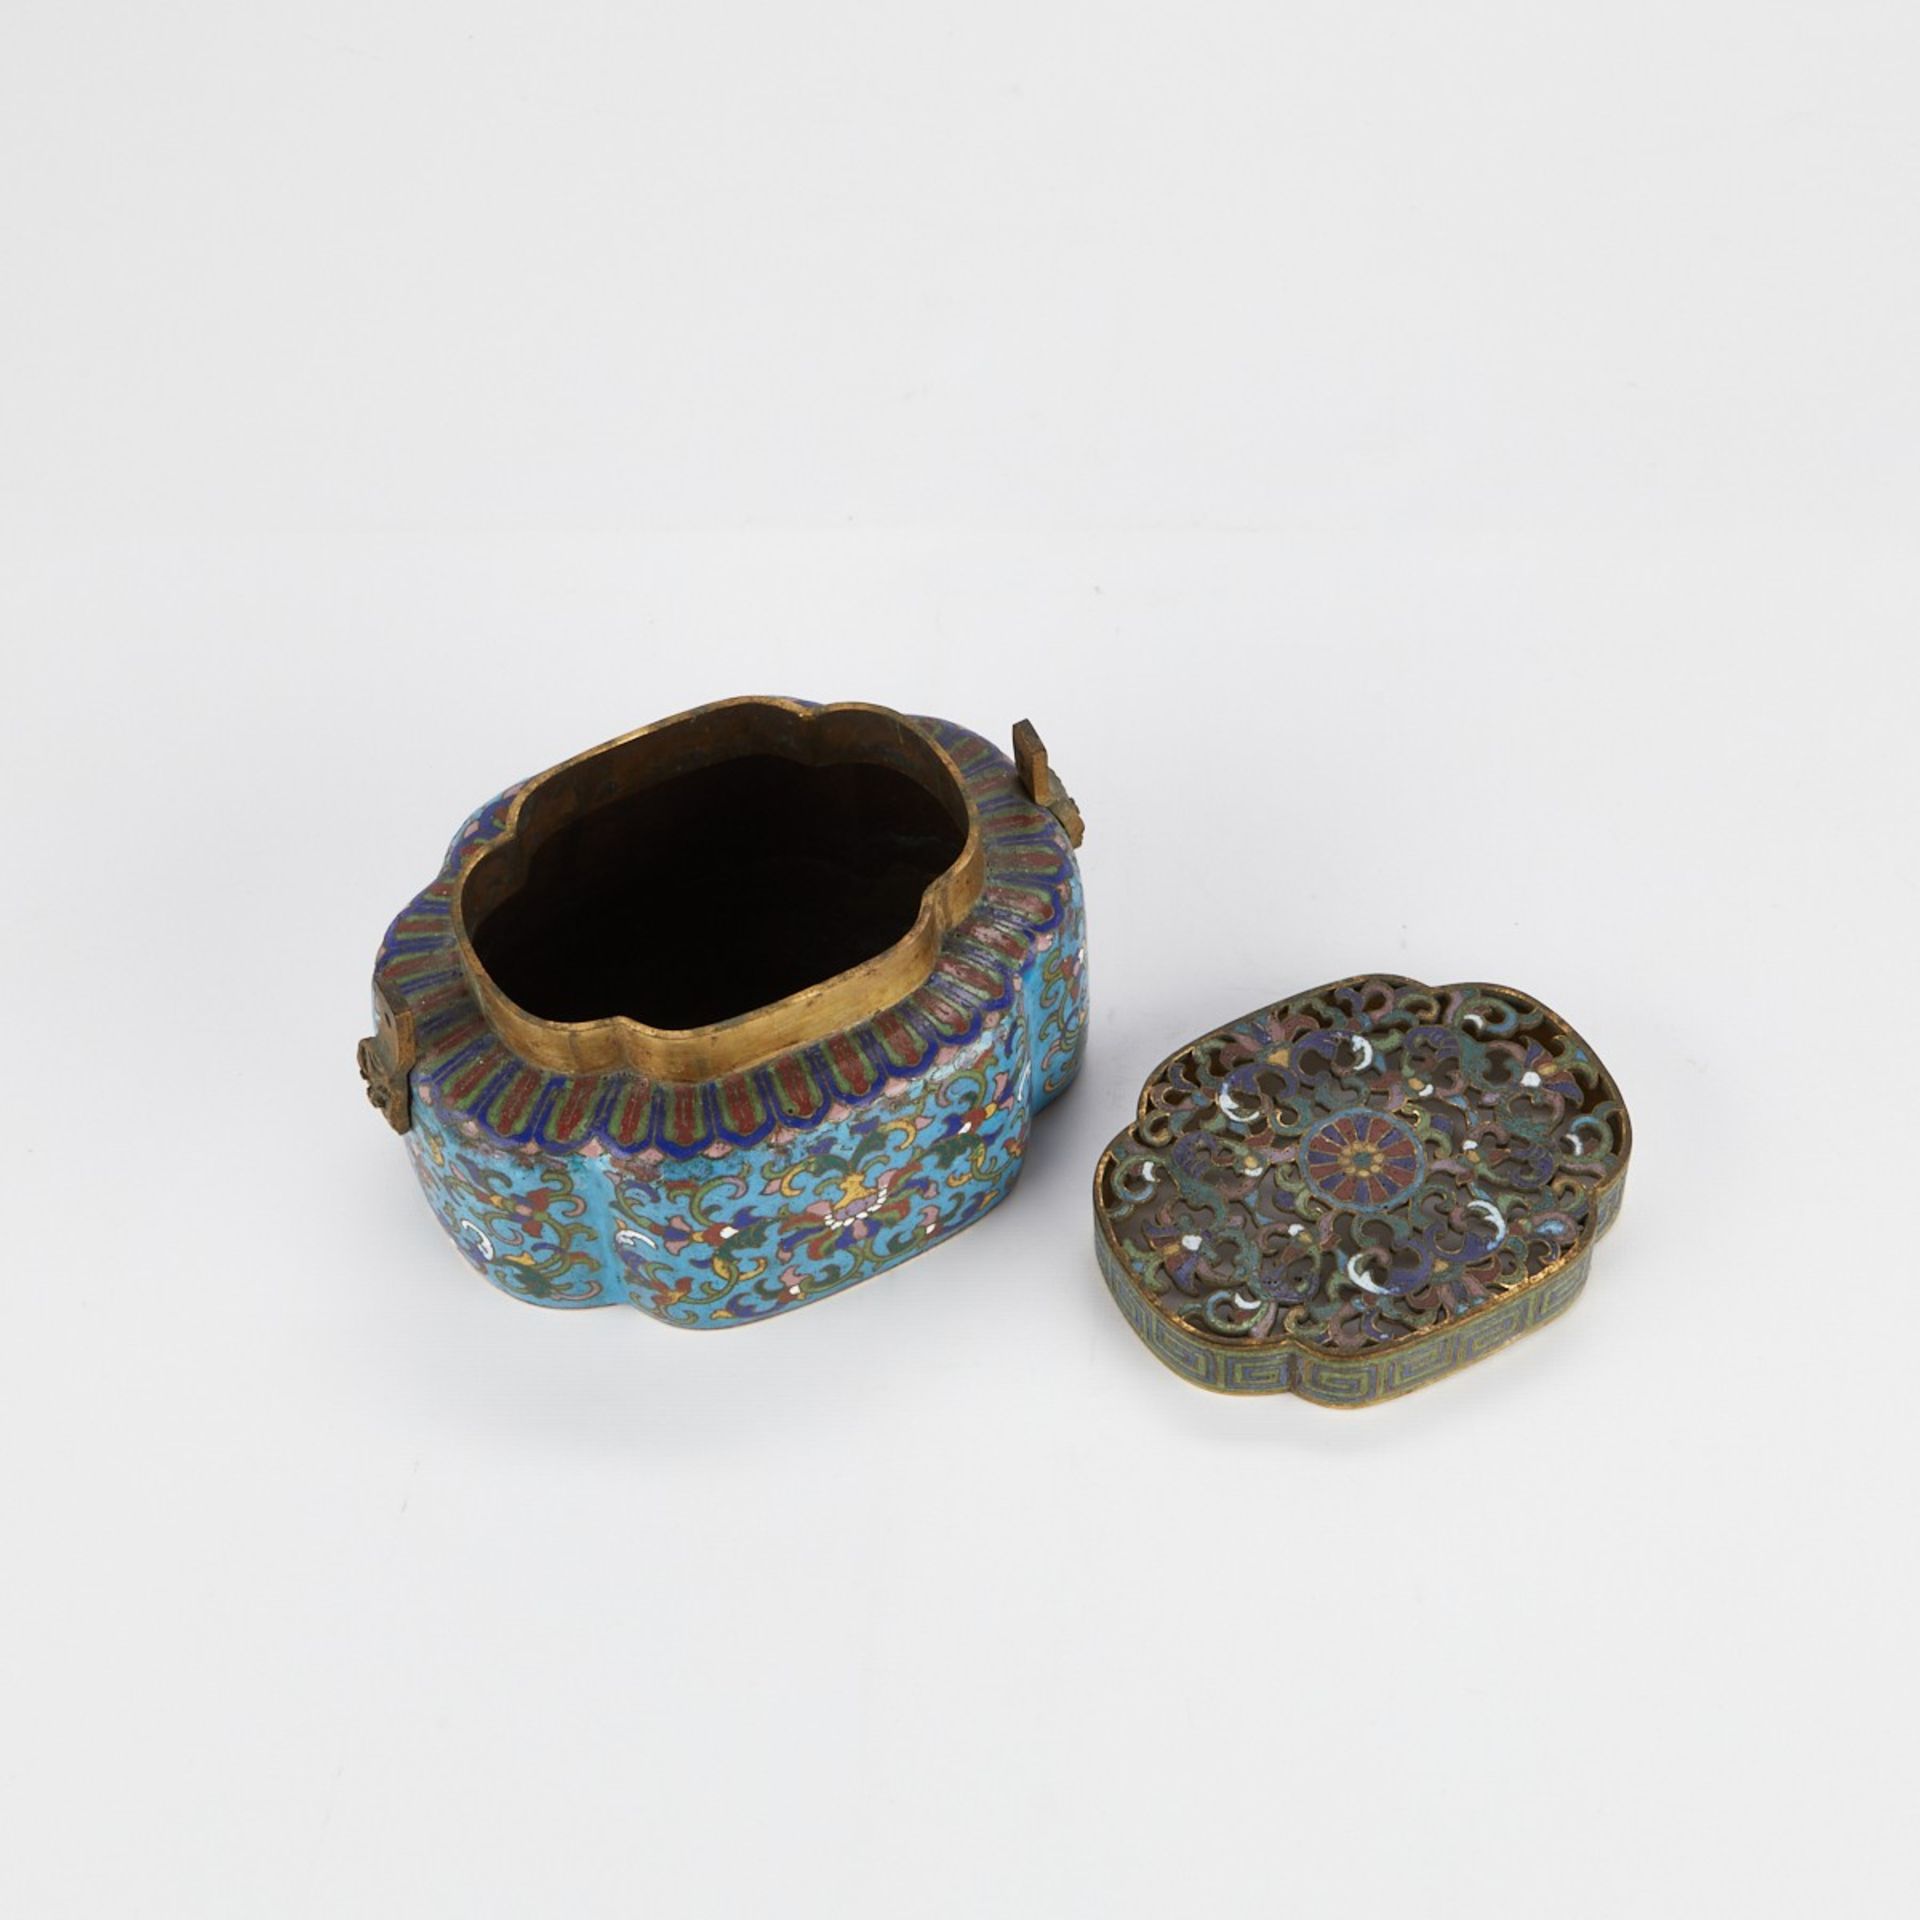 18th c. Chinese Cloisonne Hand Warmer - Image 6 of 9